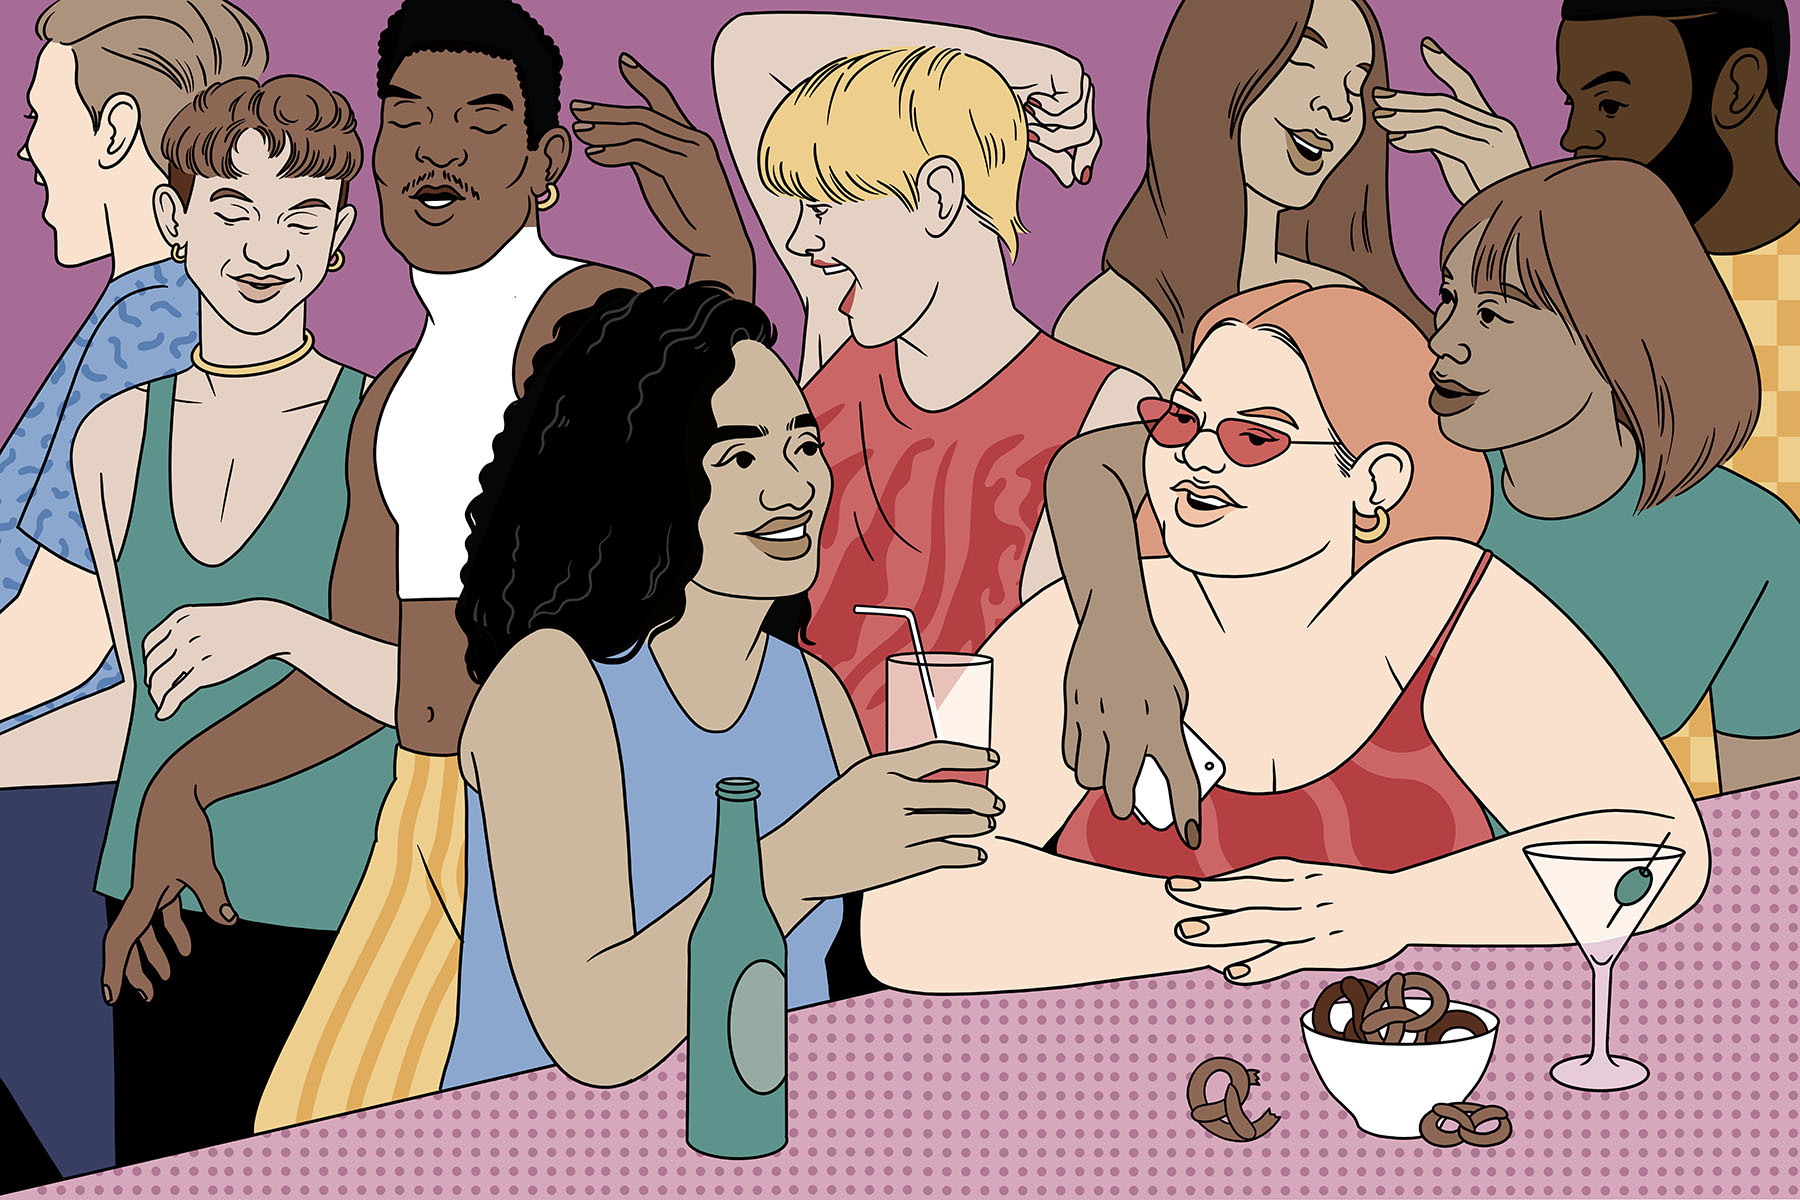 Illustration of people talking, drinking and dancing inside a bar.